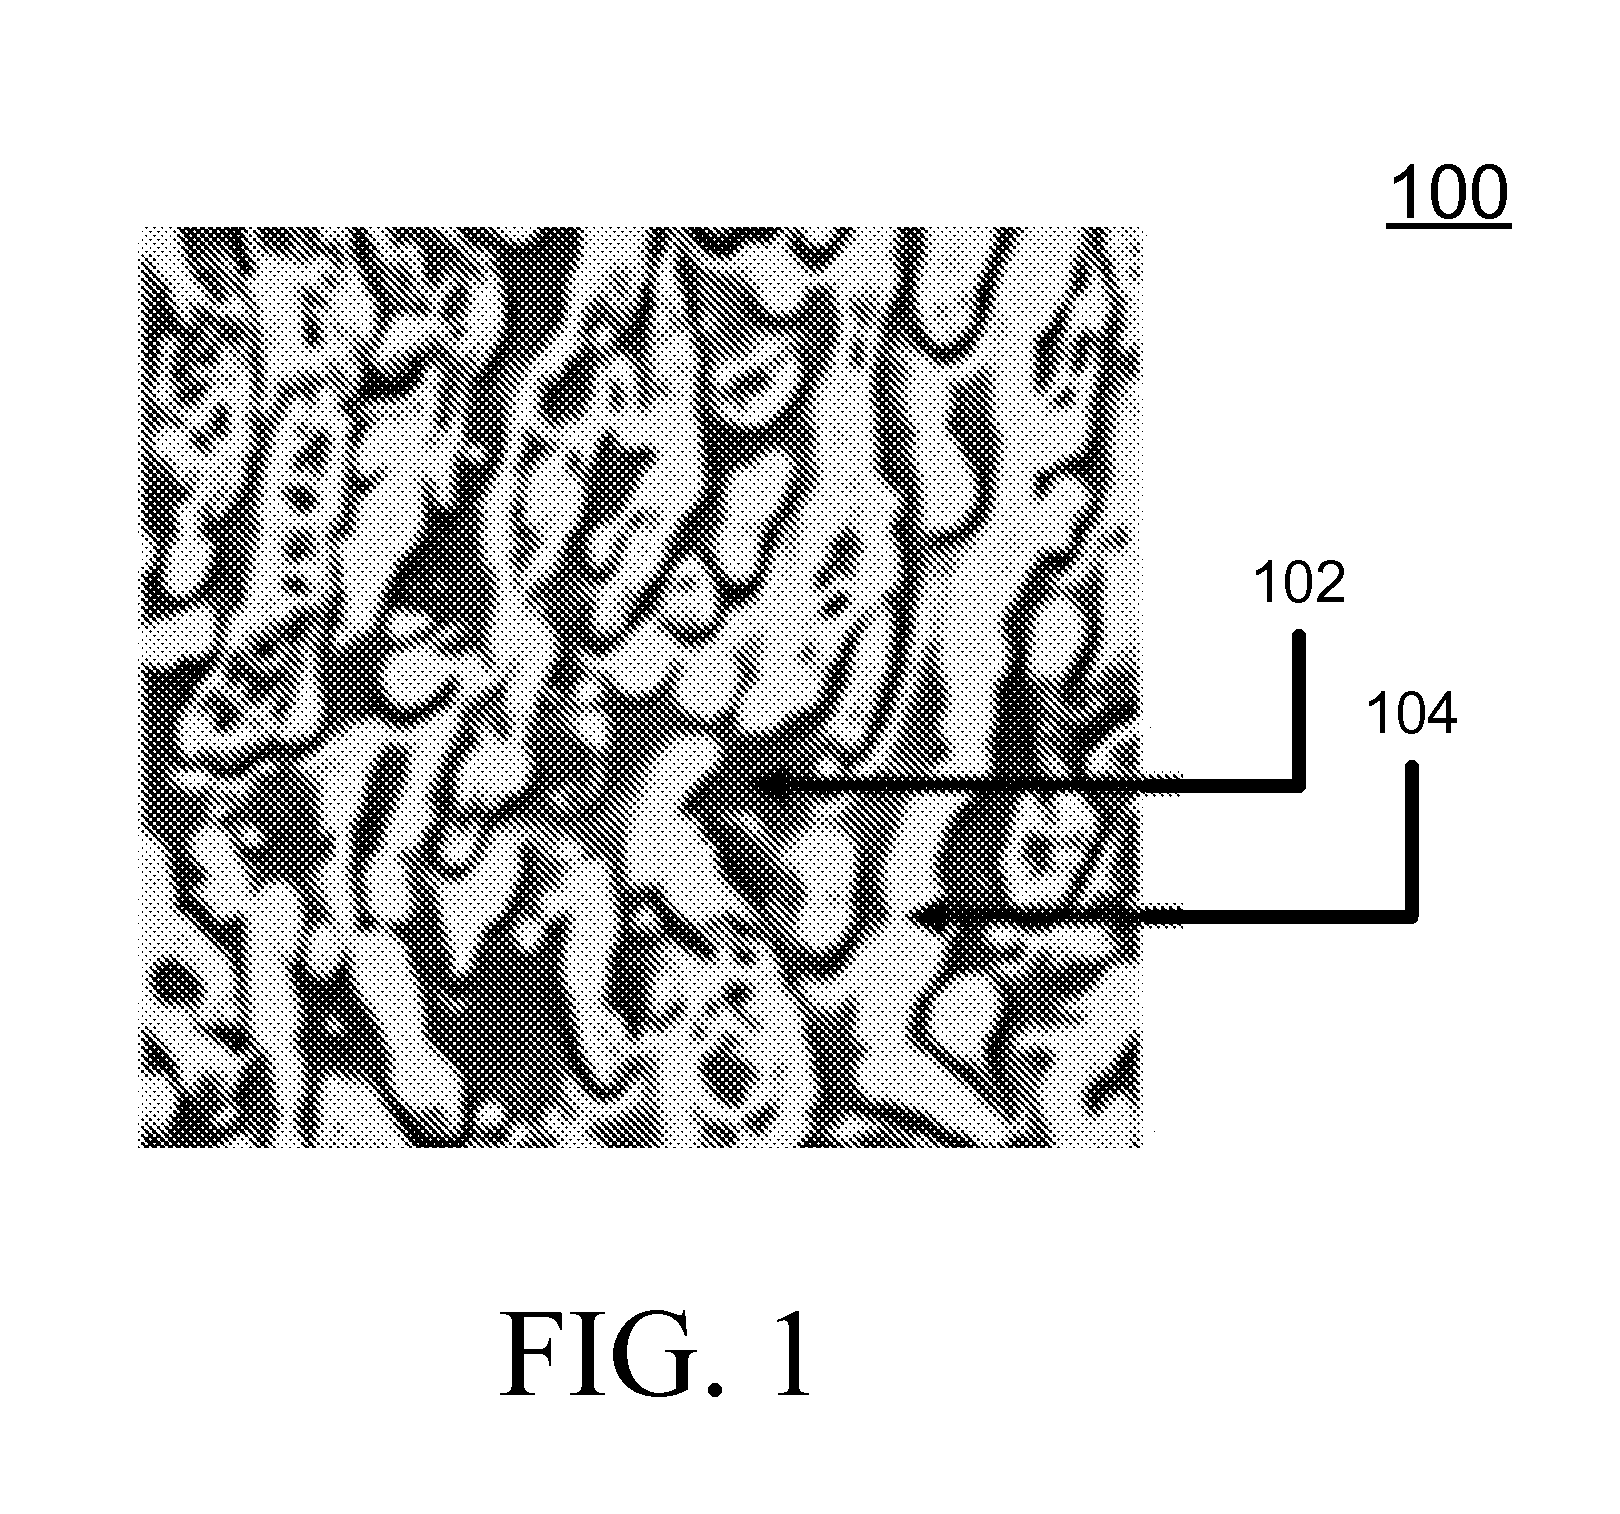 Controlled dissipation of electrostatic charge